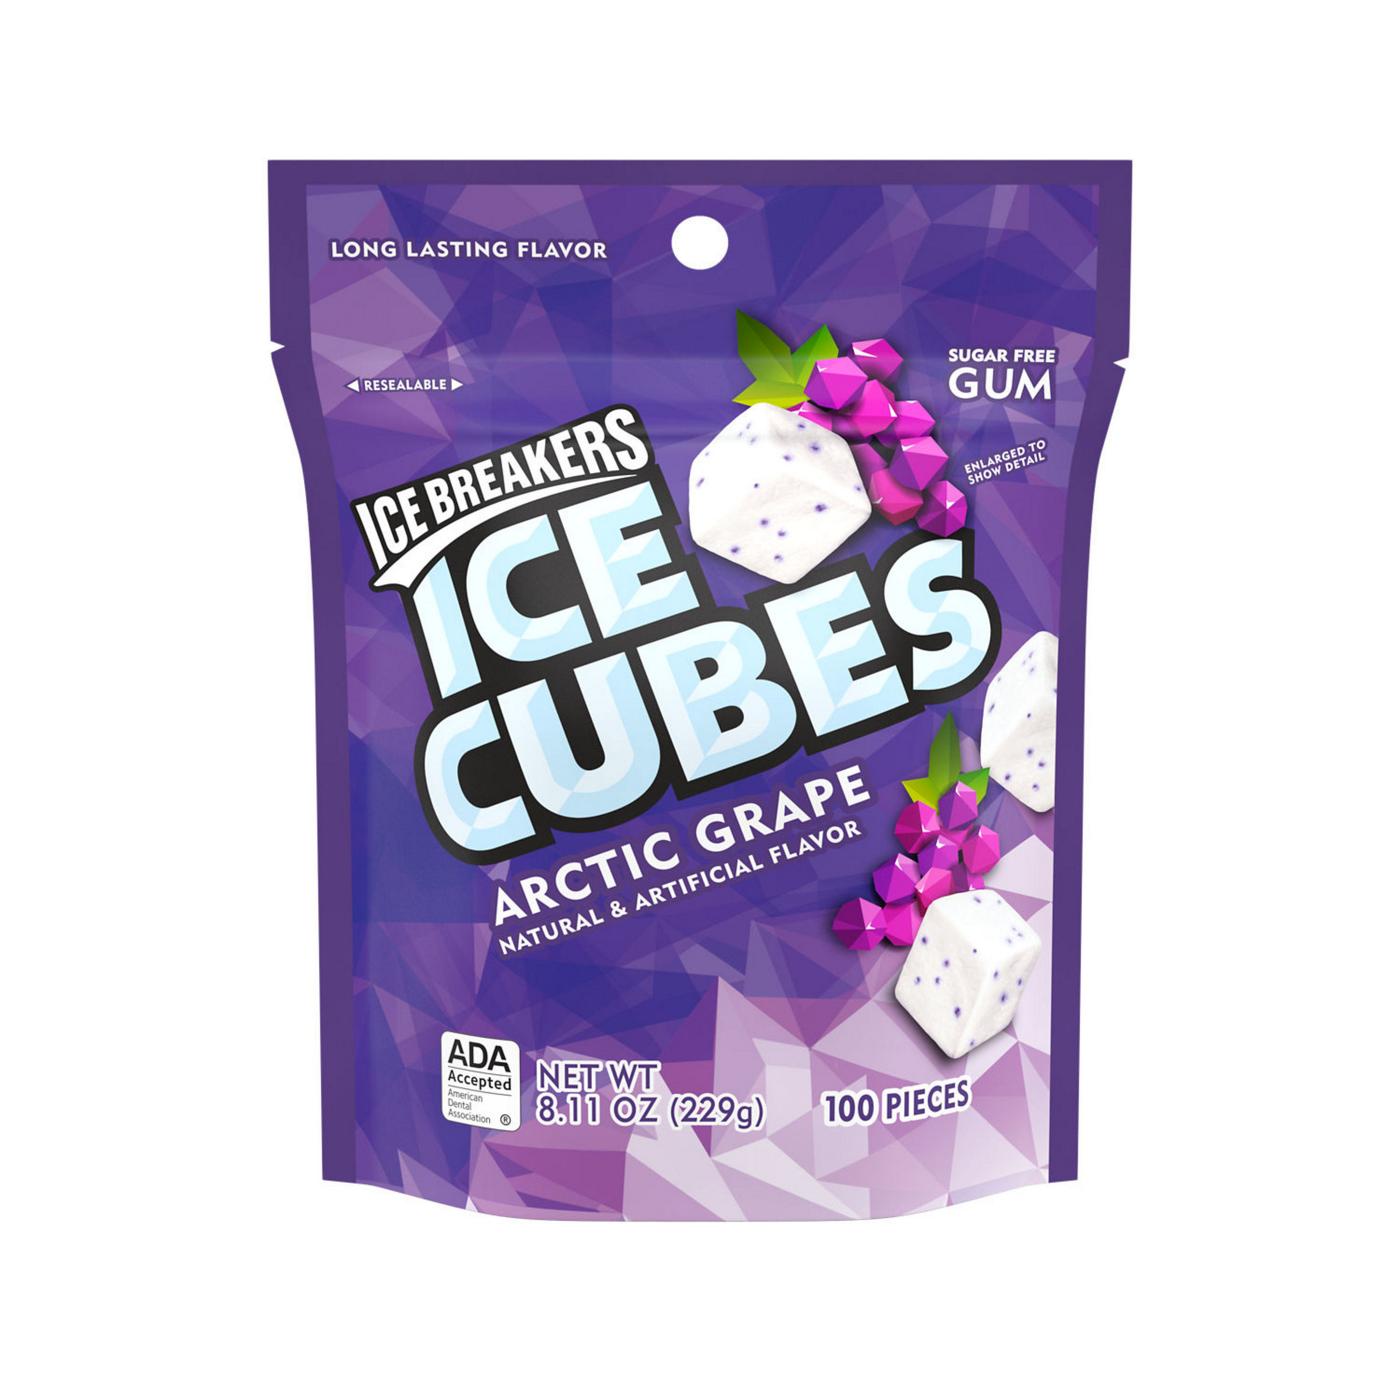 Ice Breakers Ice Cubes Arctic Grape Sugar Free Chewing Gum Pouch; image 1 of 7